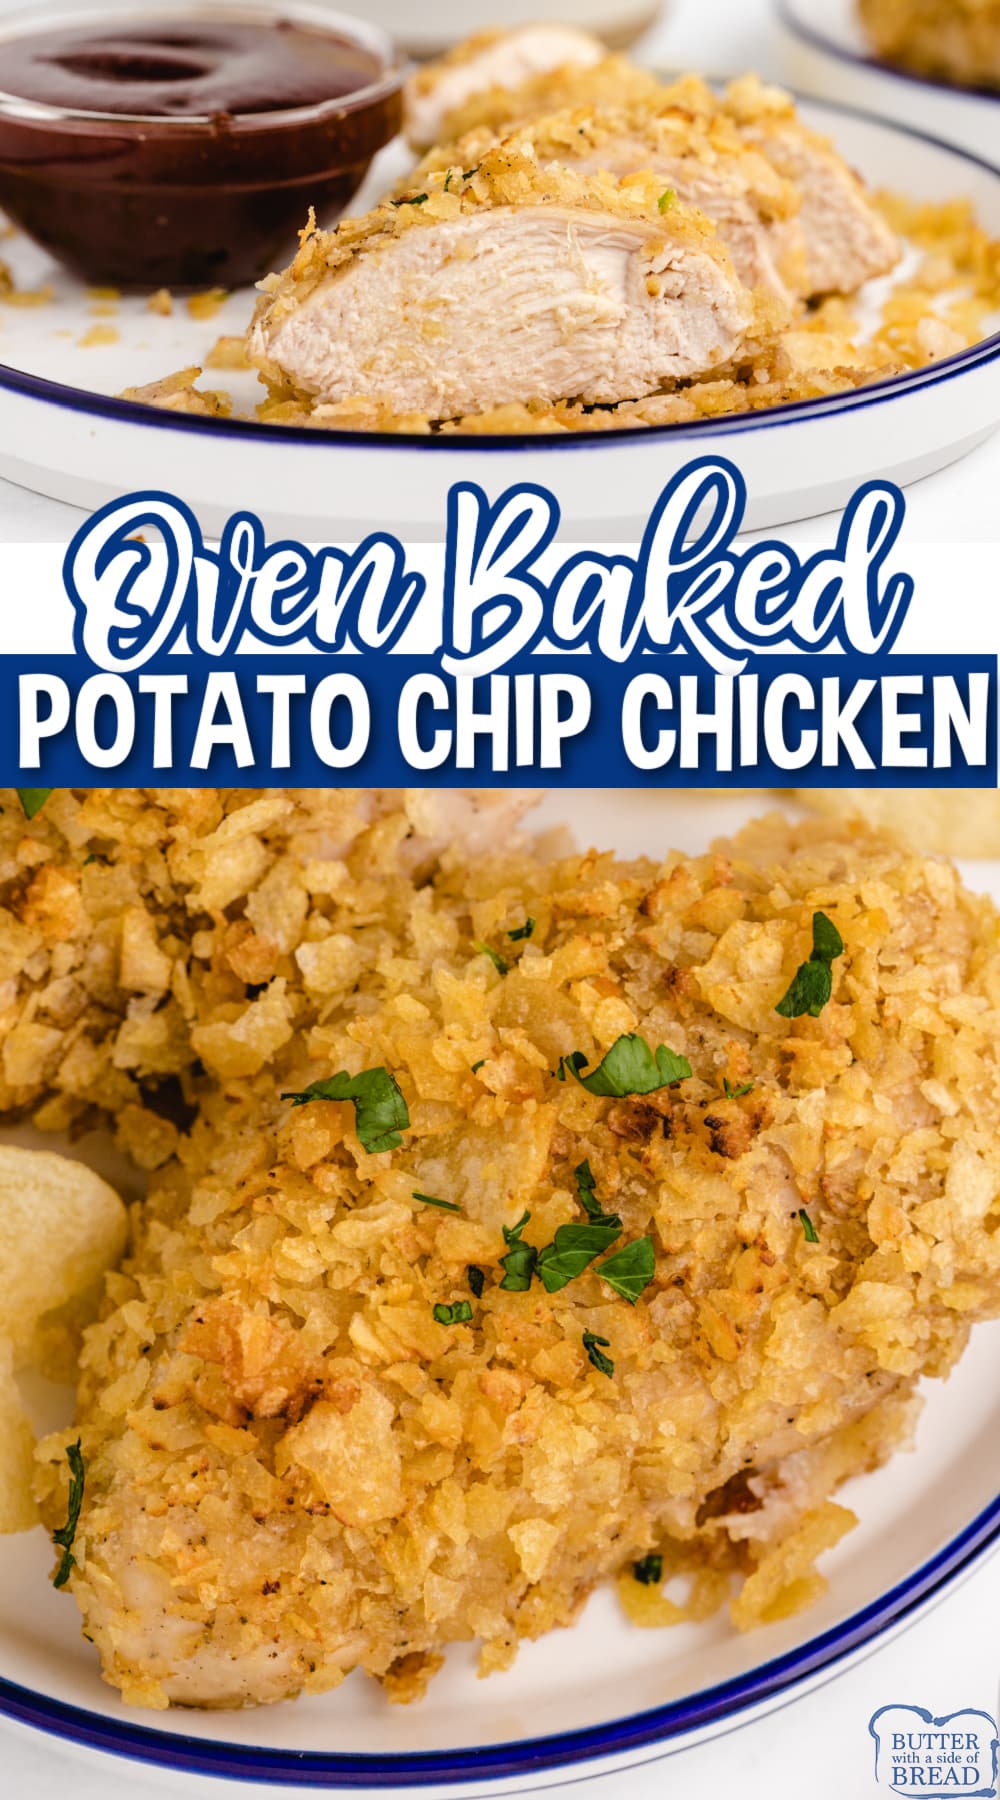 Potato Chip Chicken made with chicken breasts coated in crushed potato chips and lots of seasonings. Flavorful, juicy, oven baked chicken breast recipe.